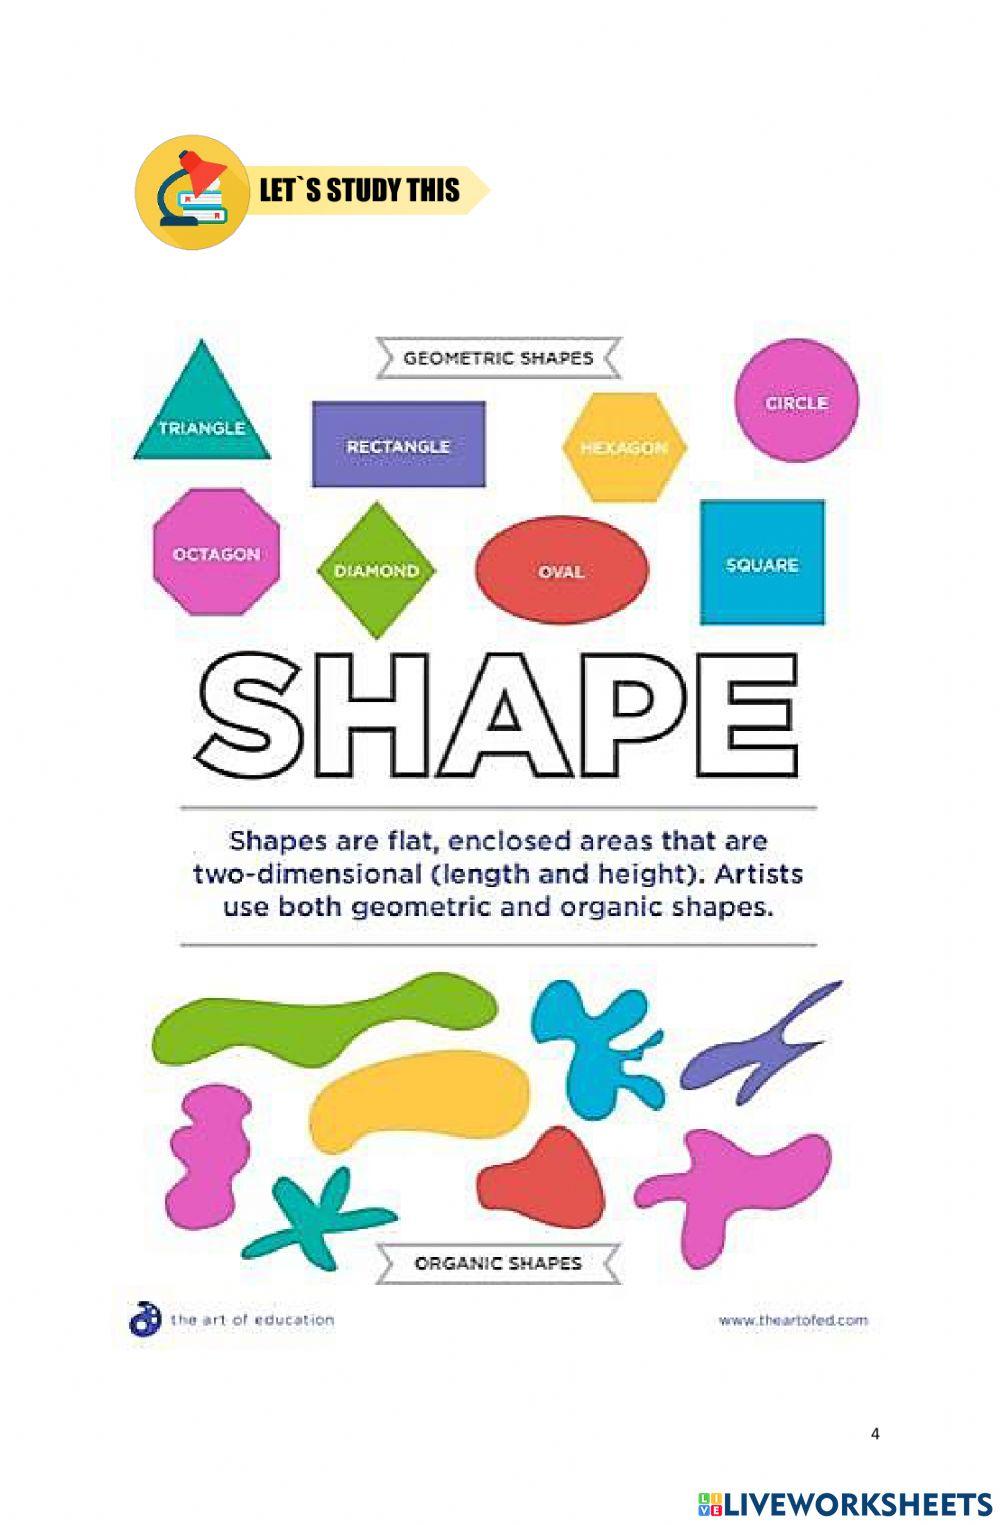 Q3W5-Lesson 18 - Fun with Shapes - ACTIVITIES-ODL